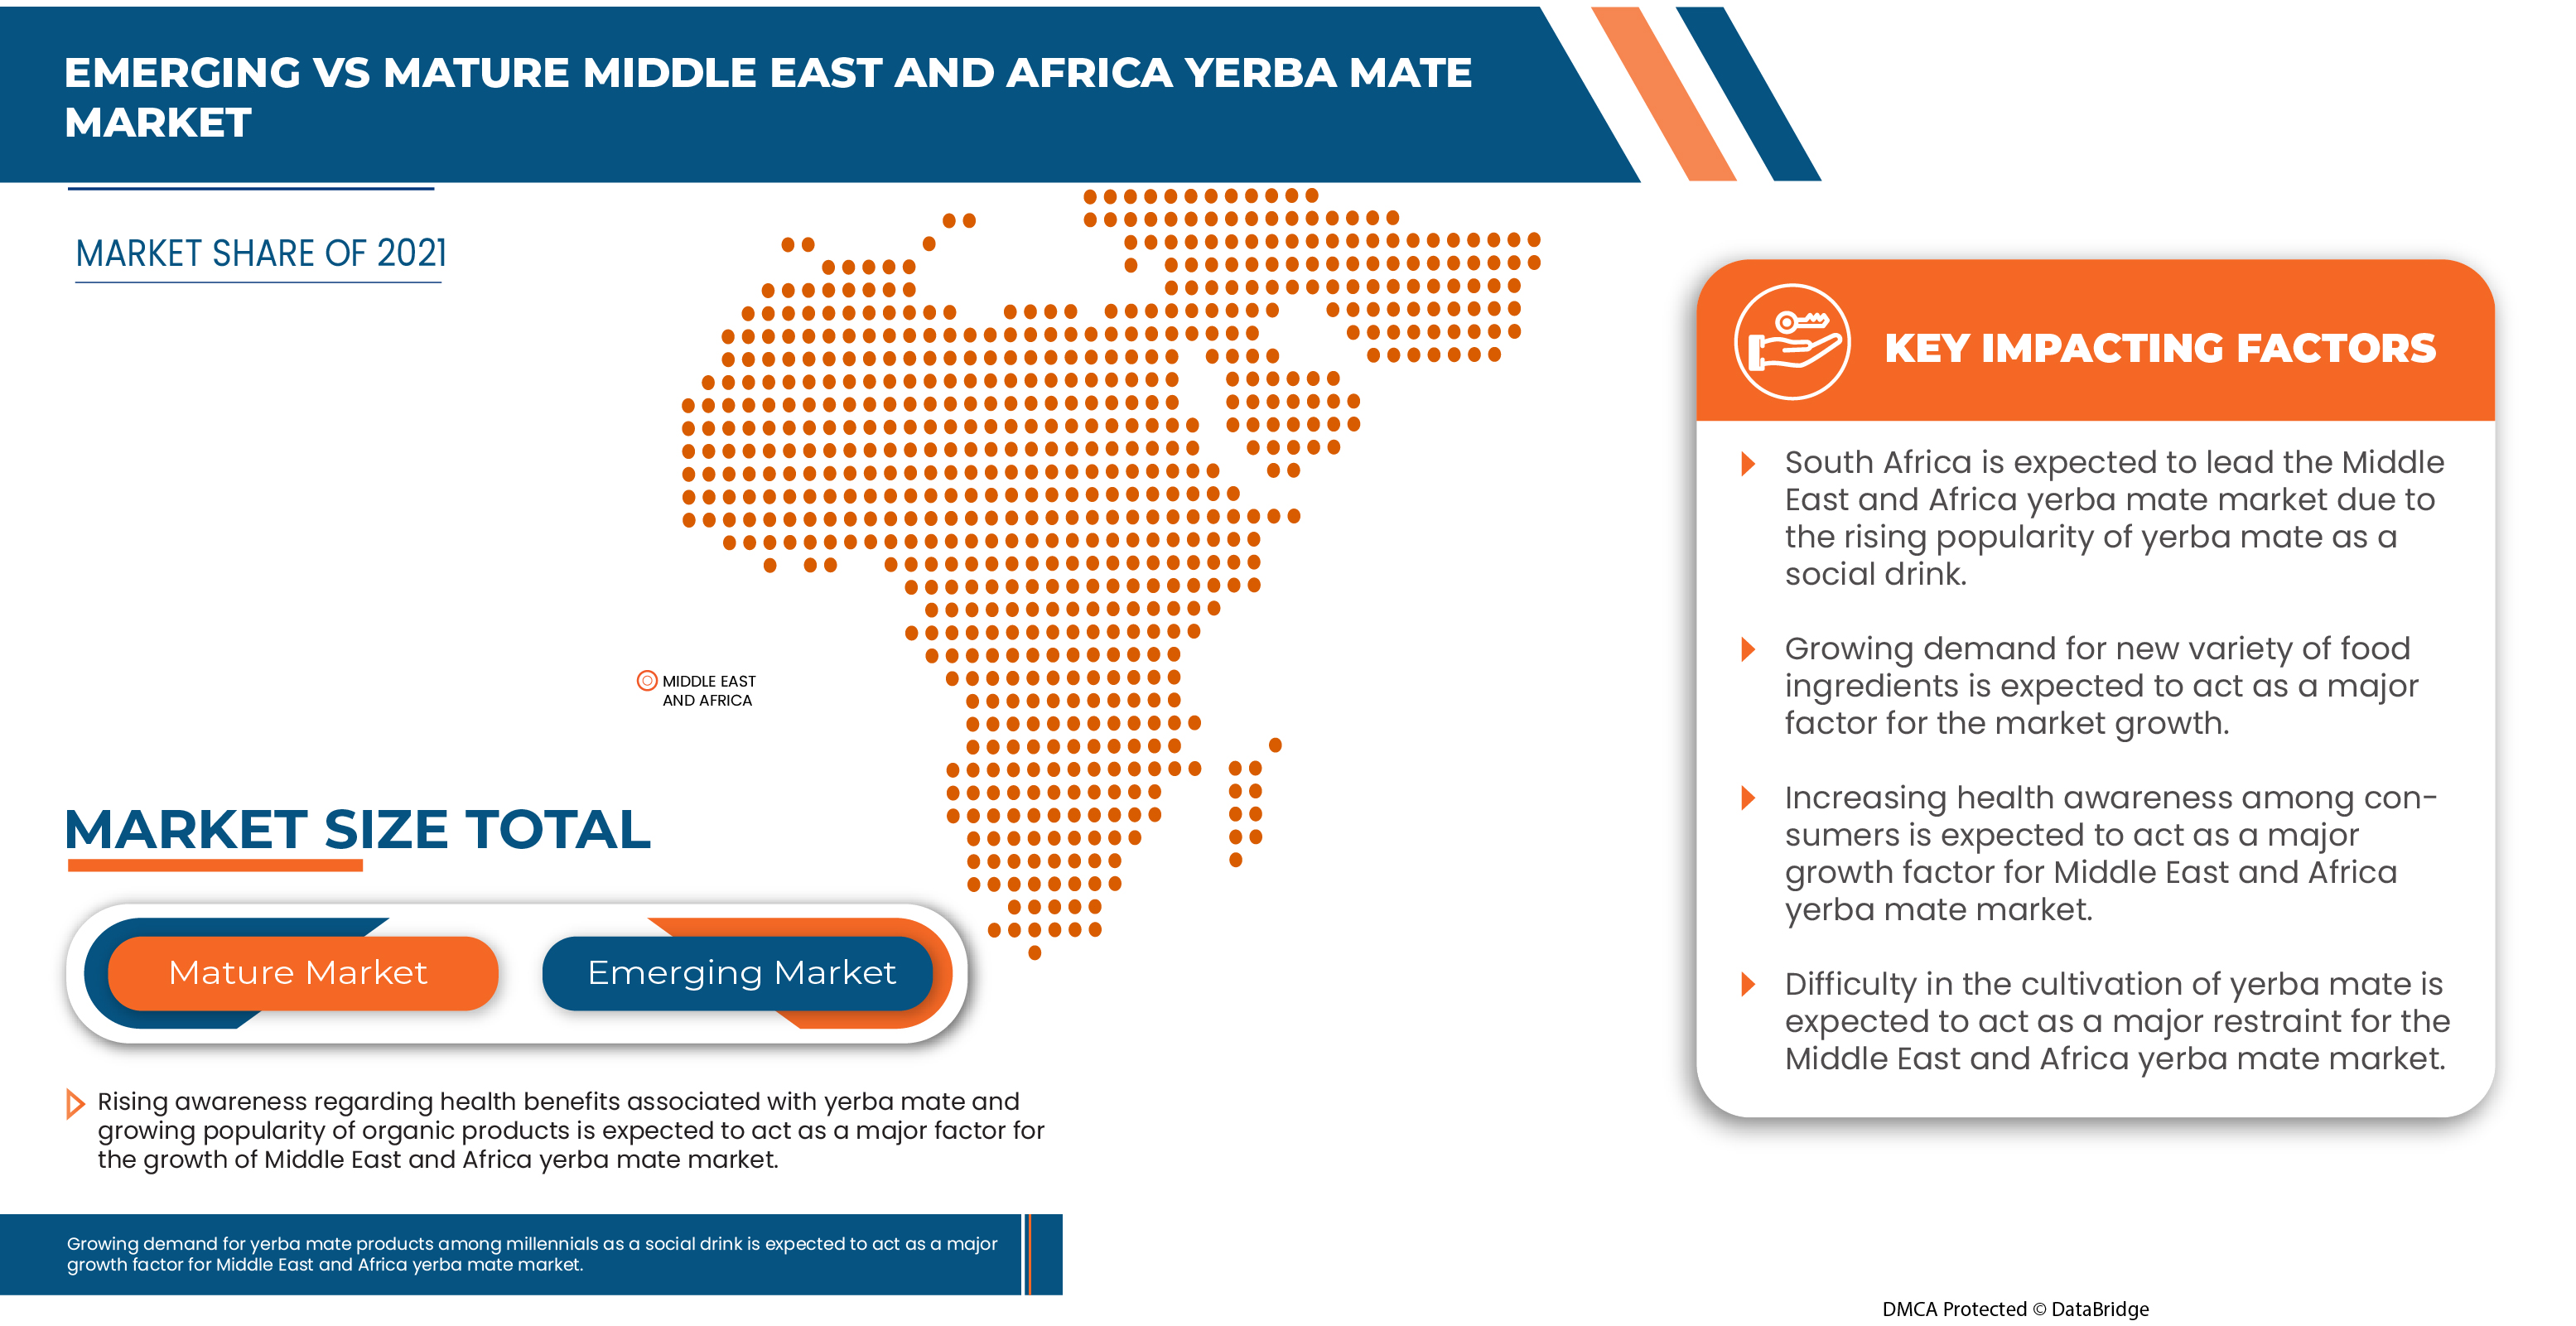 Middle East and Africa Yerba Mate Market